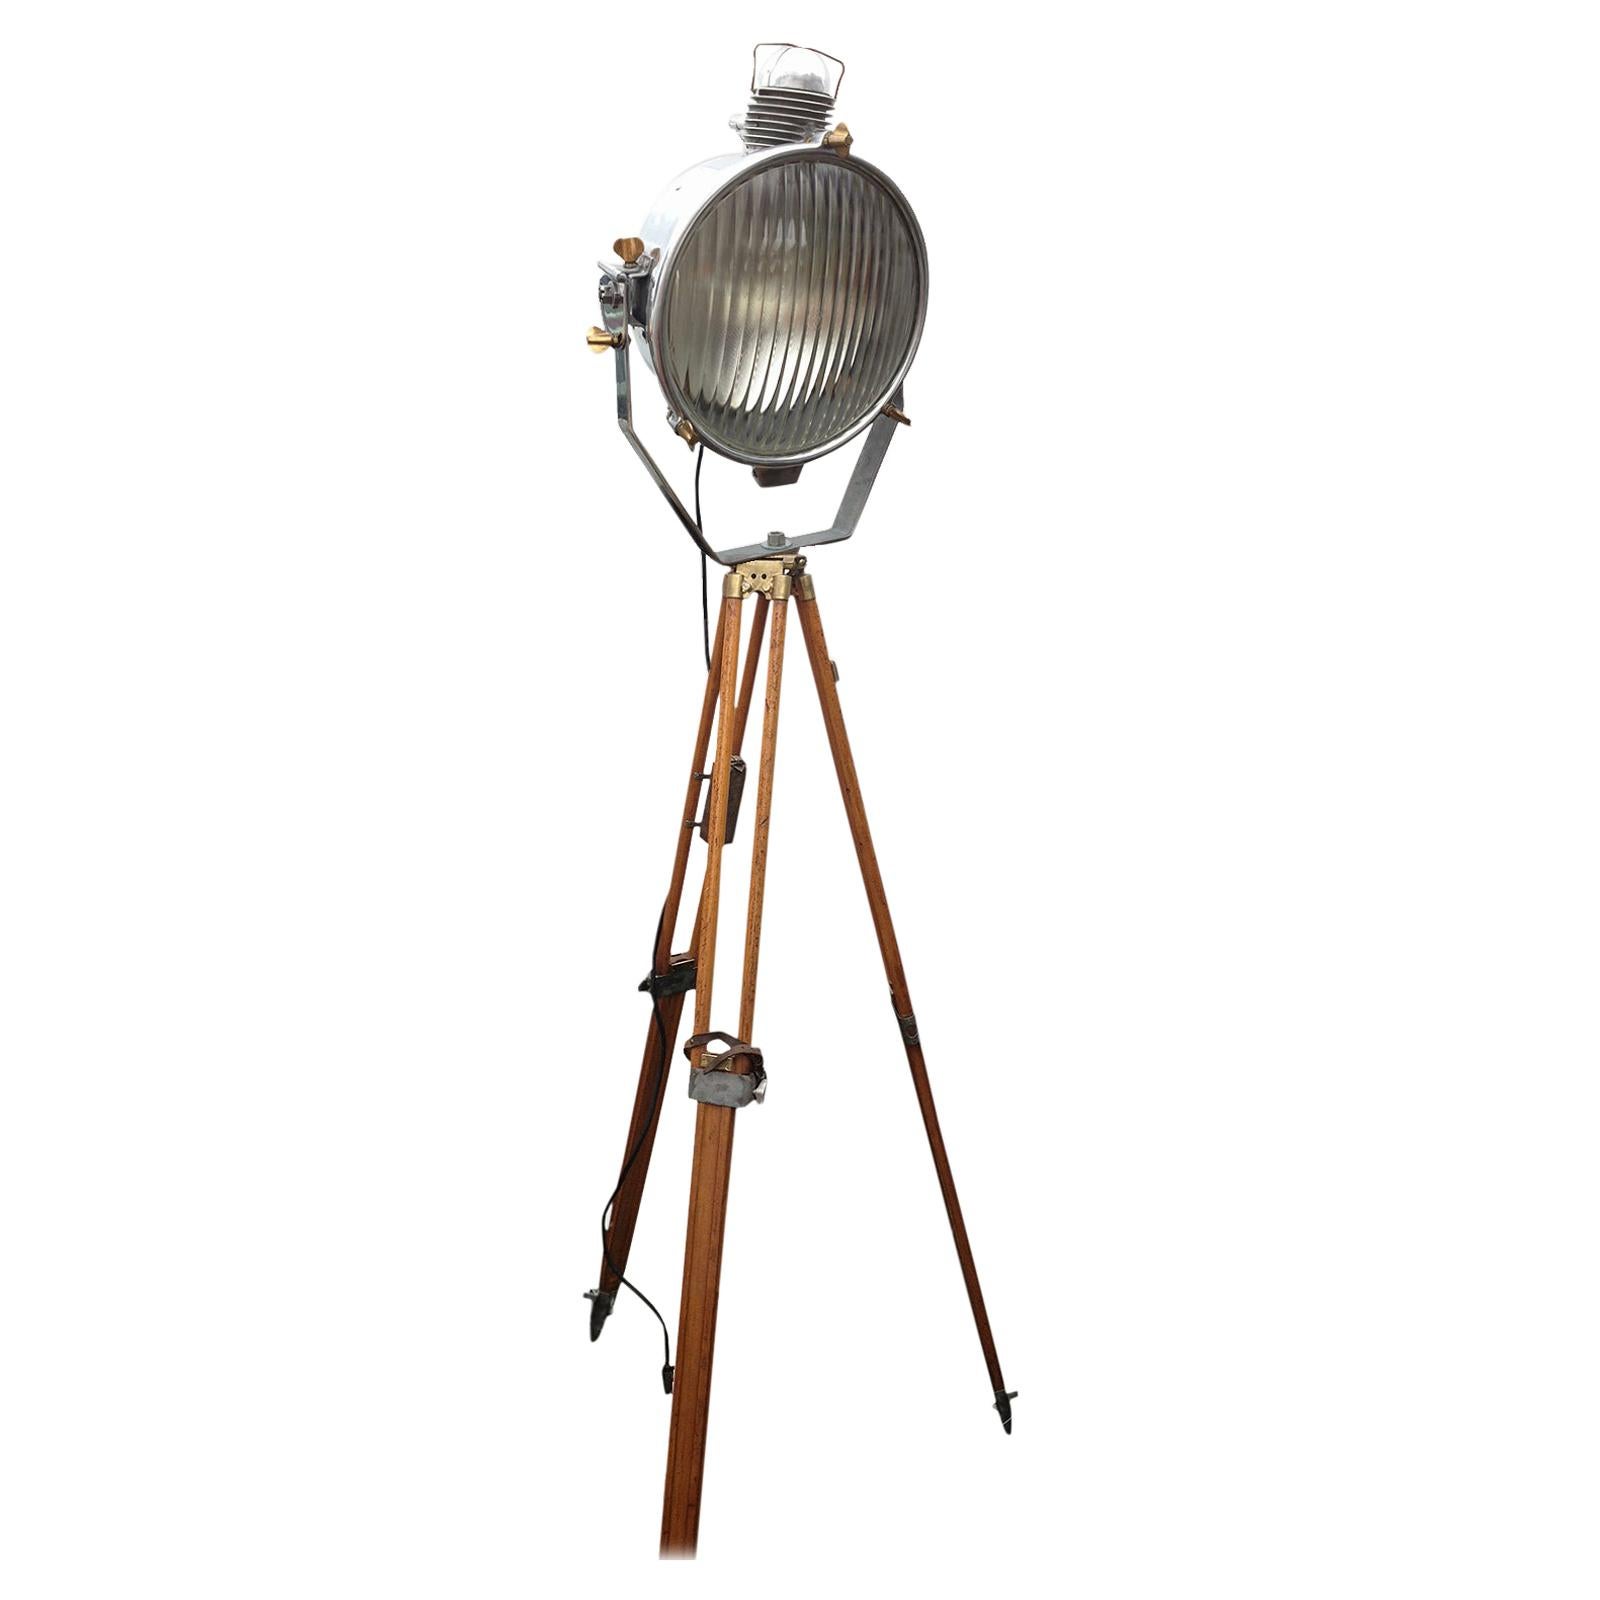 Floodlight with Wooden Tripod, USA, 1890